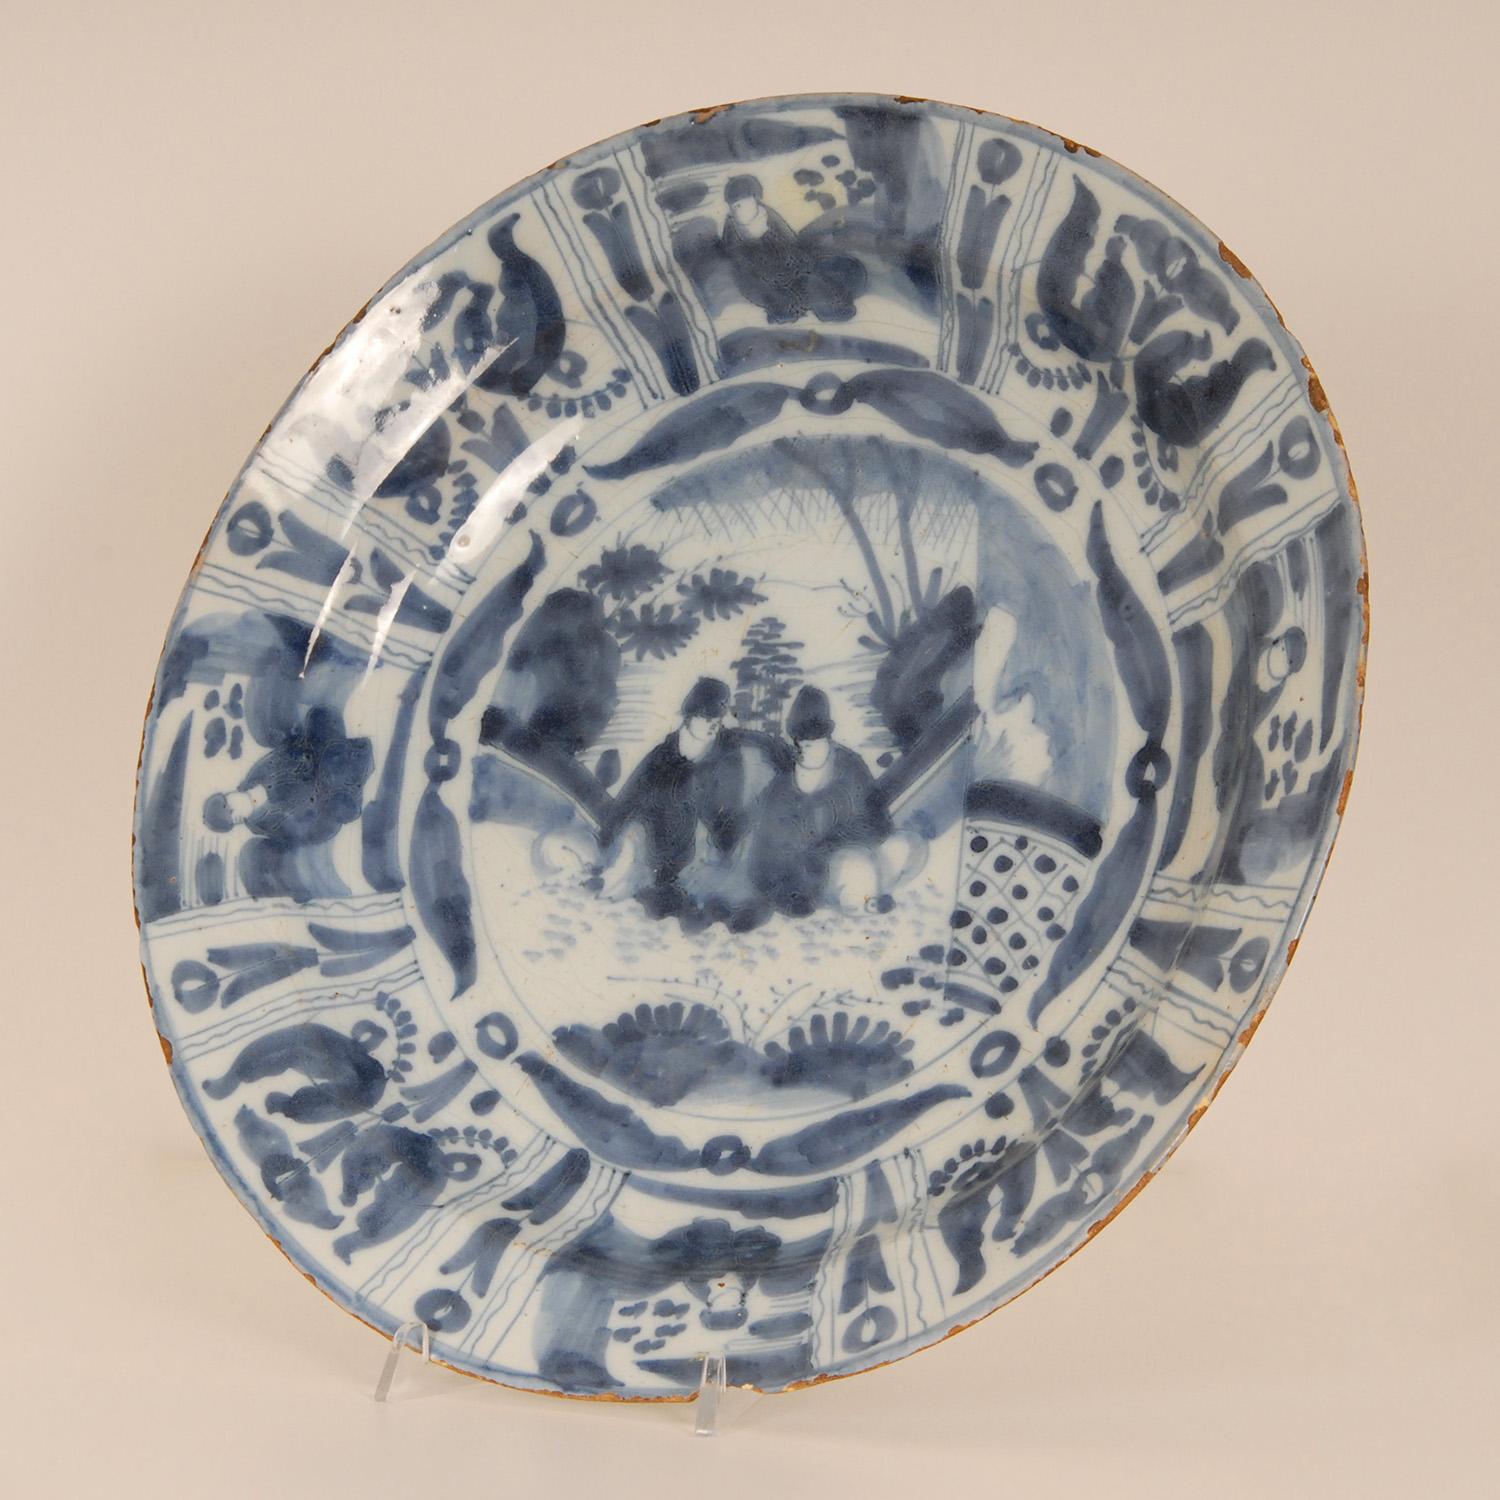 Large 17th Century Delft dish Chinoiserie blue and white Delftware Charger
Material: Delft, earthenware, pottery.
Design: Ming Dynasty Wanli style Chinoiserie
Style: Ming, William and Mary - Louis XIV Baroque, Antique, Asian antique,